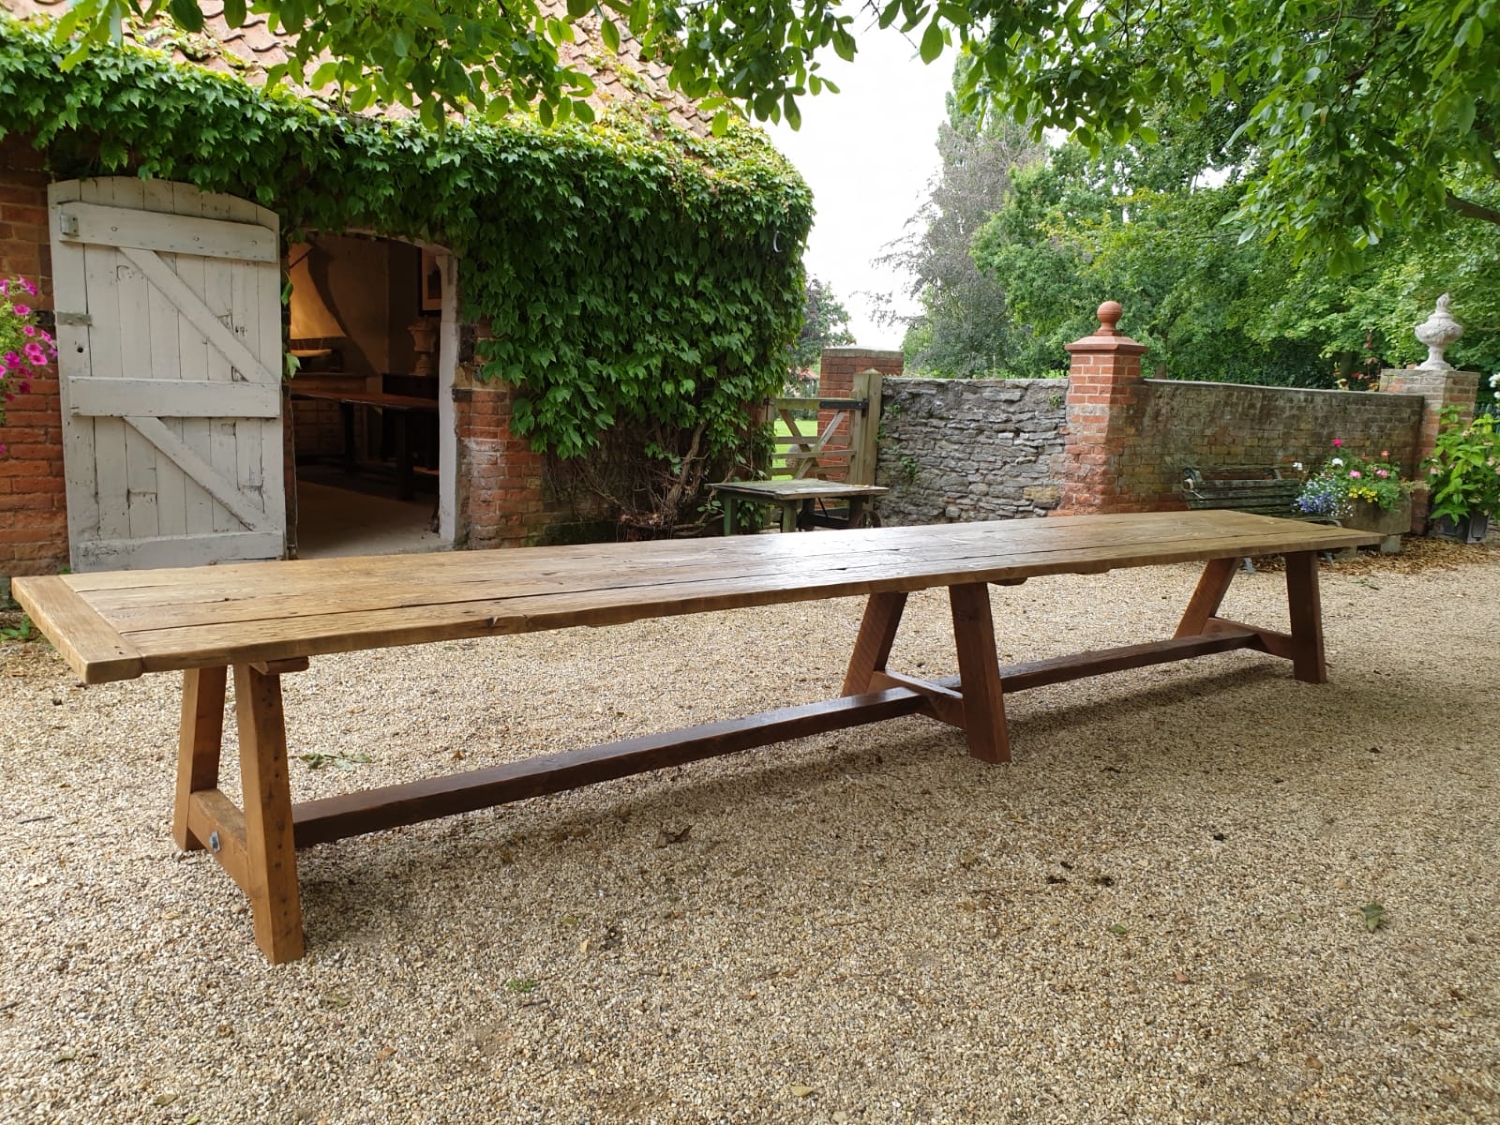 19th Century Period Dining Table 6m Long, Seats 24 with Comfort